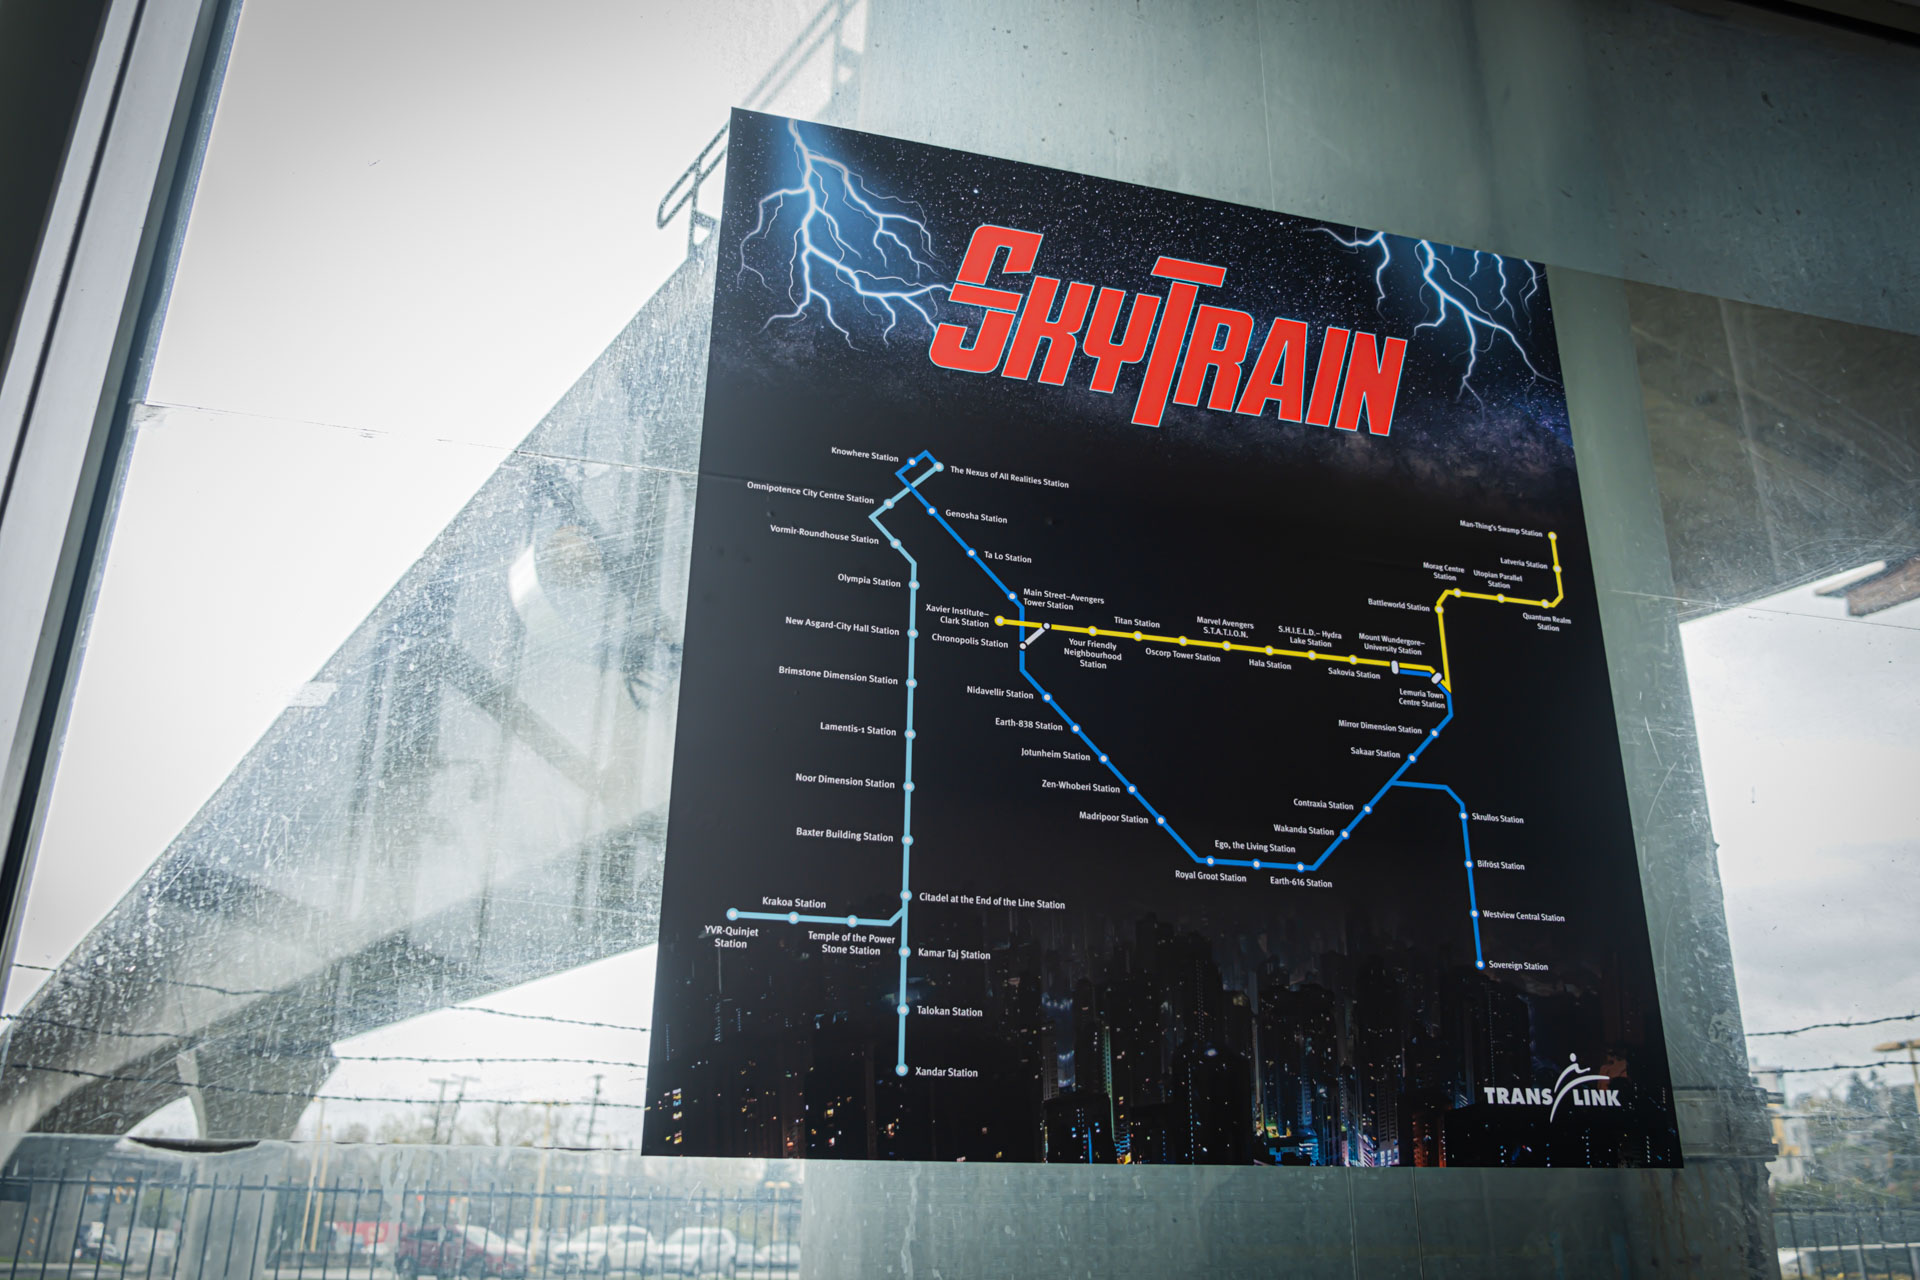 The Avengers SkyTrain map at Braid Station with the guideway in the background